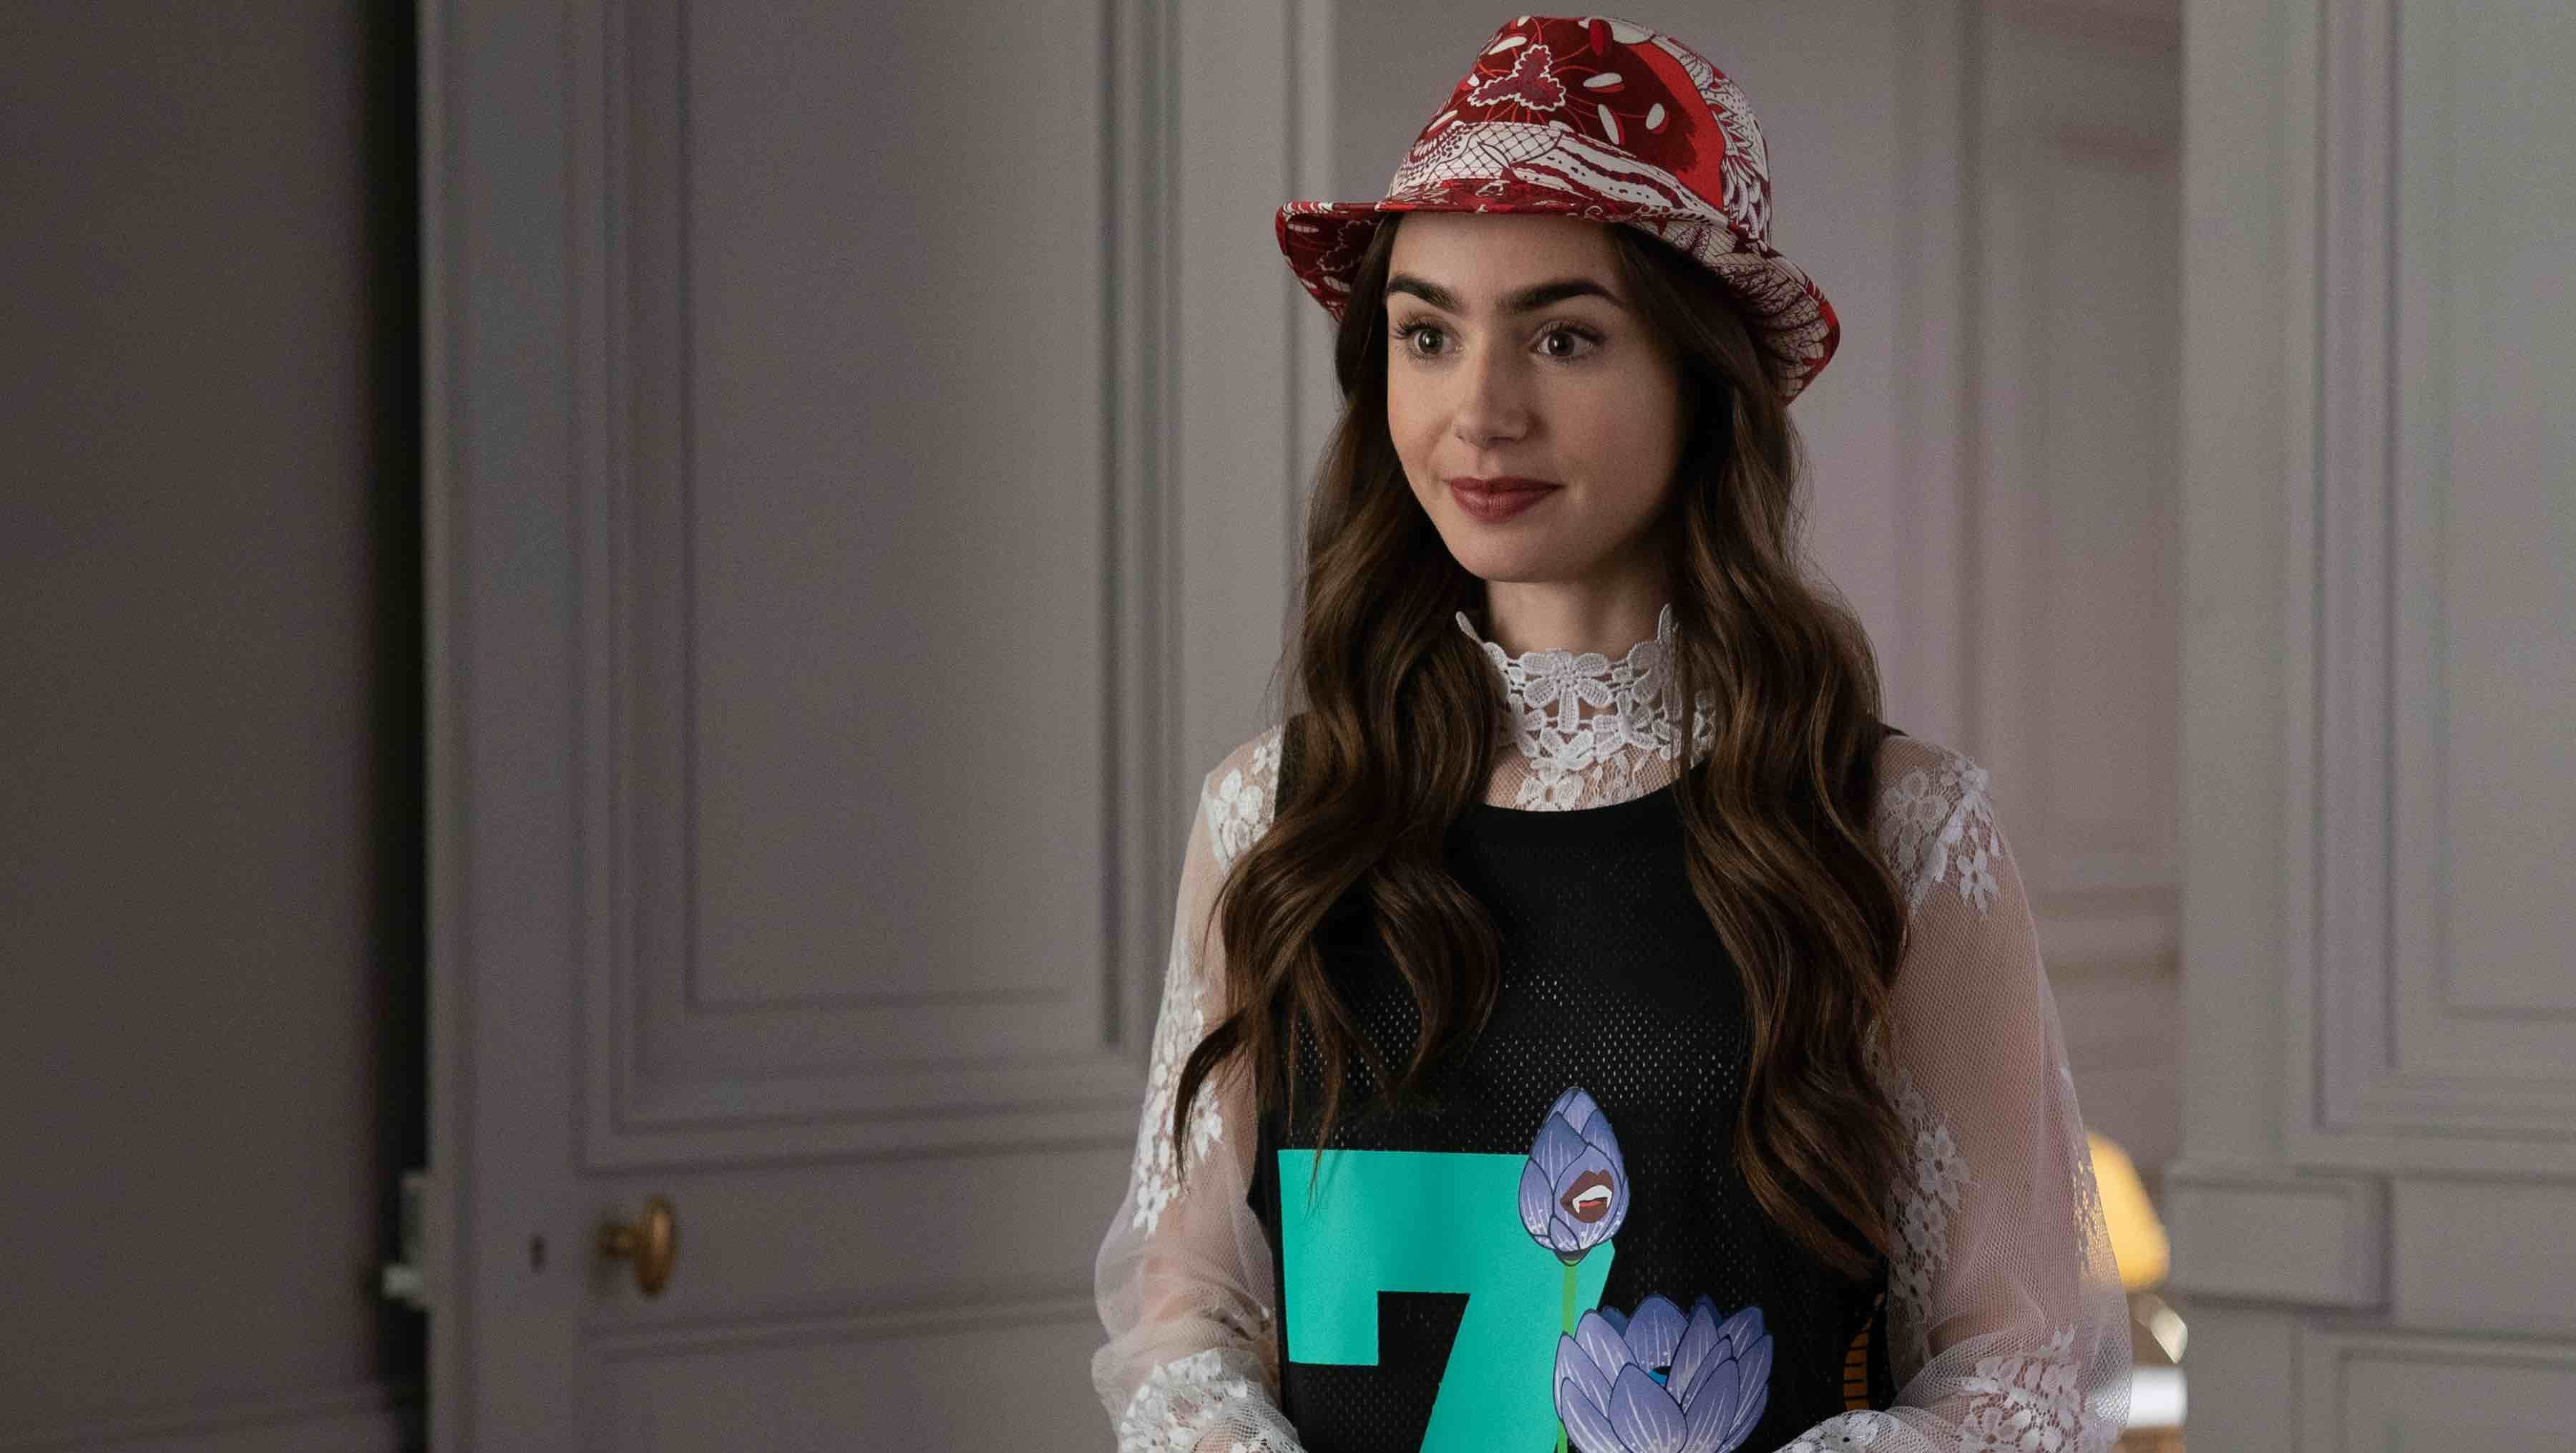 Emily in Paris Season 3: Release Date, Trailer and Photos